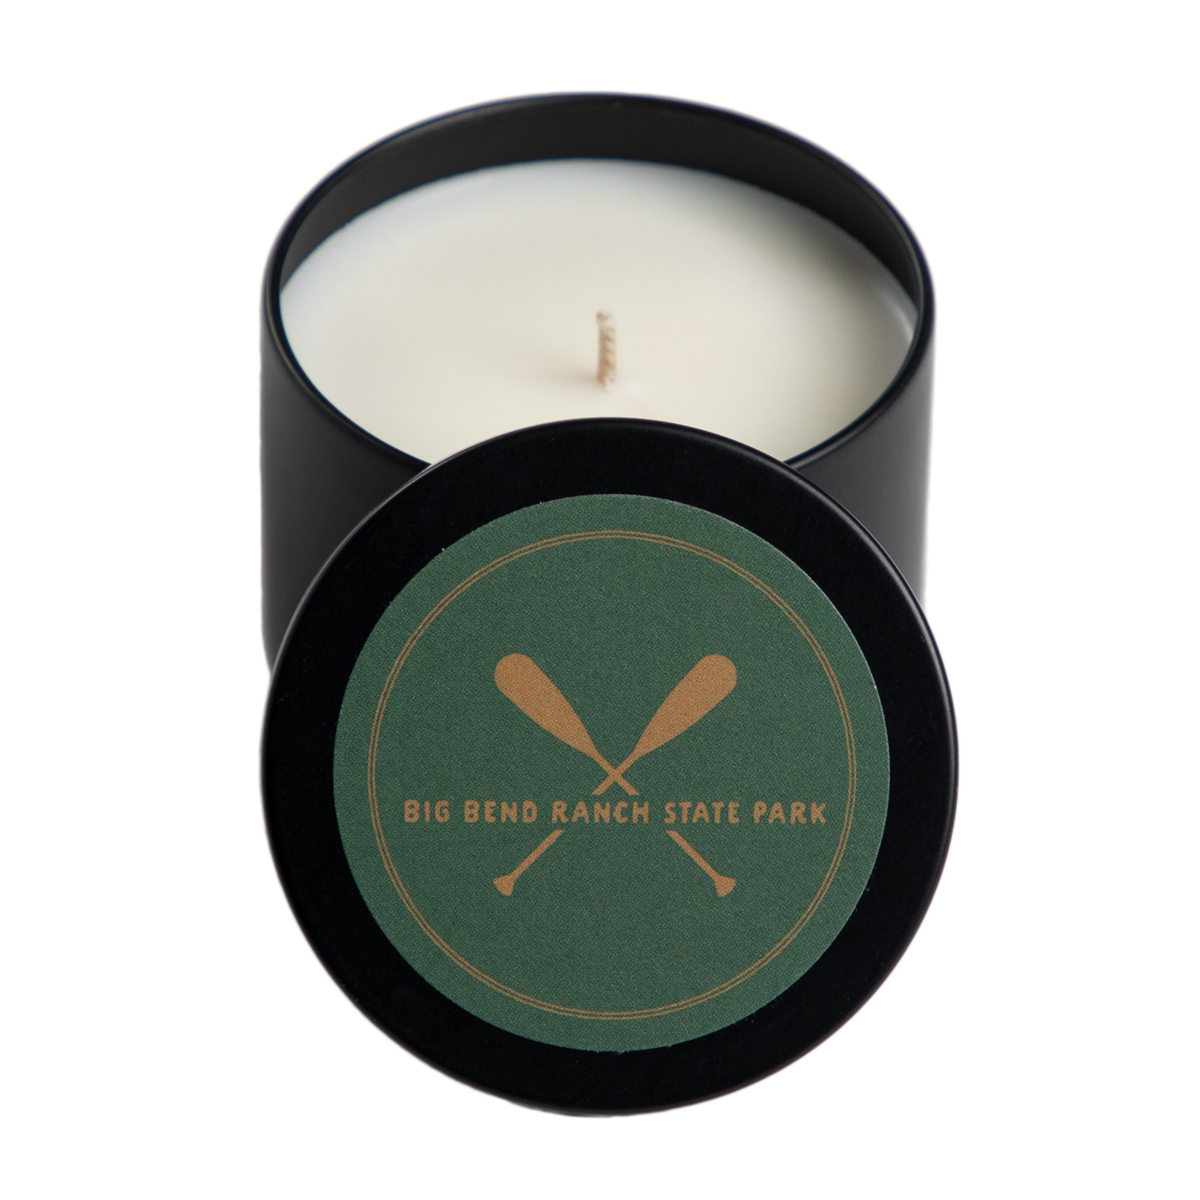 Big Bend Ranch State Park Candle, 4 oz.